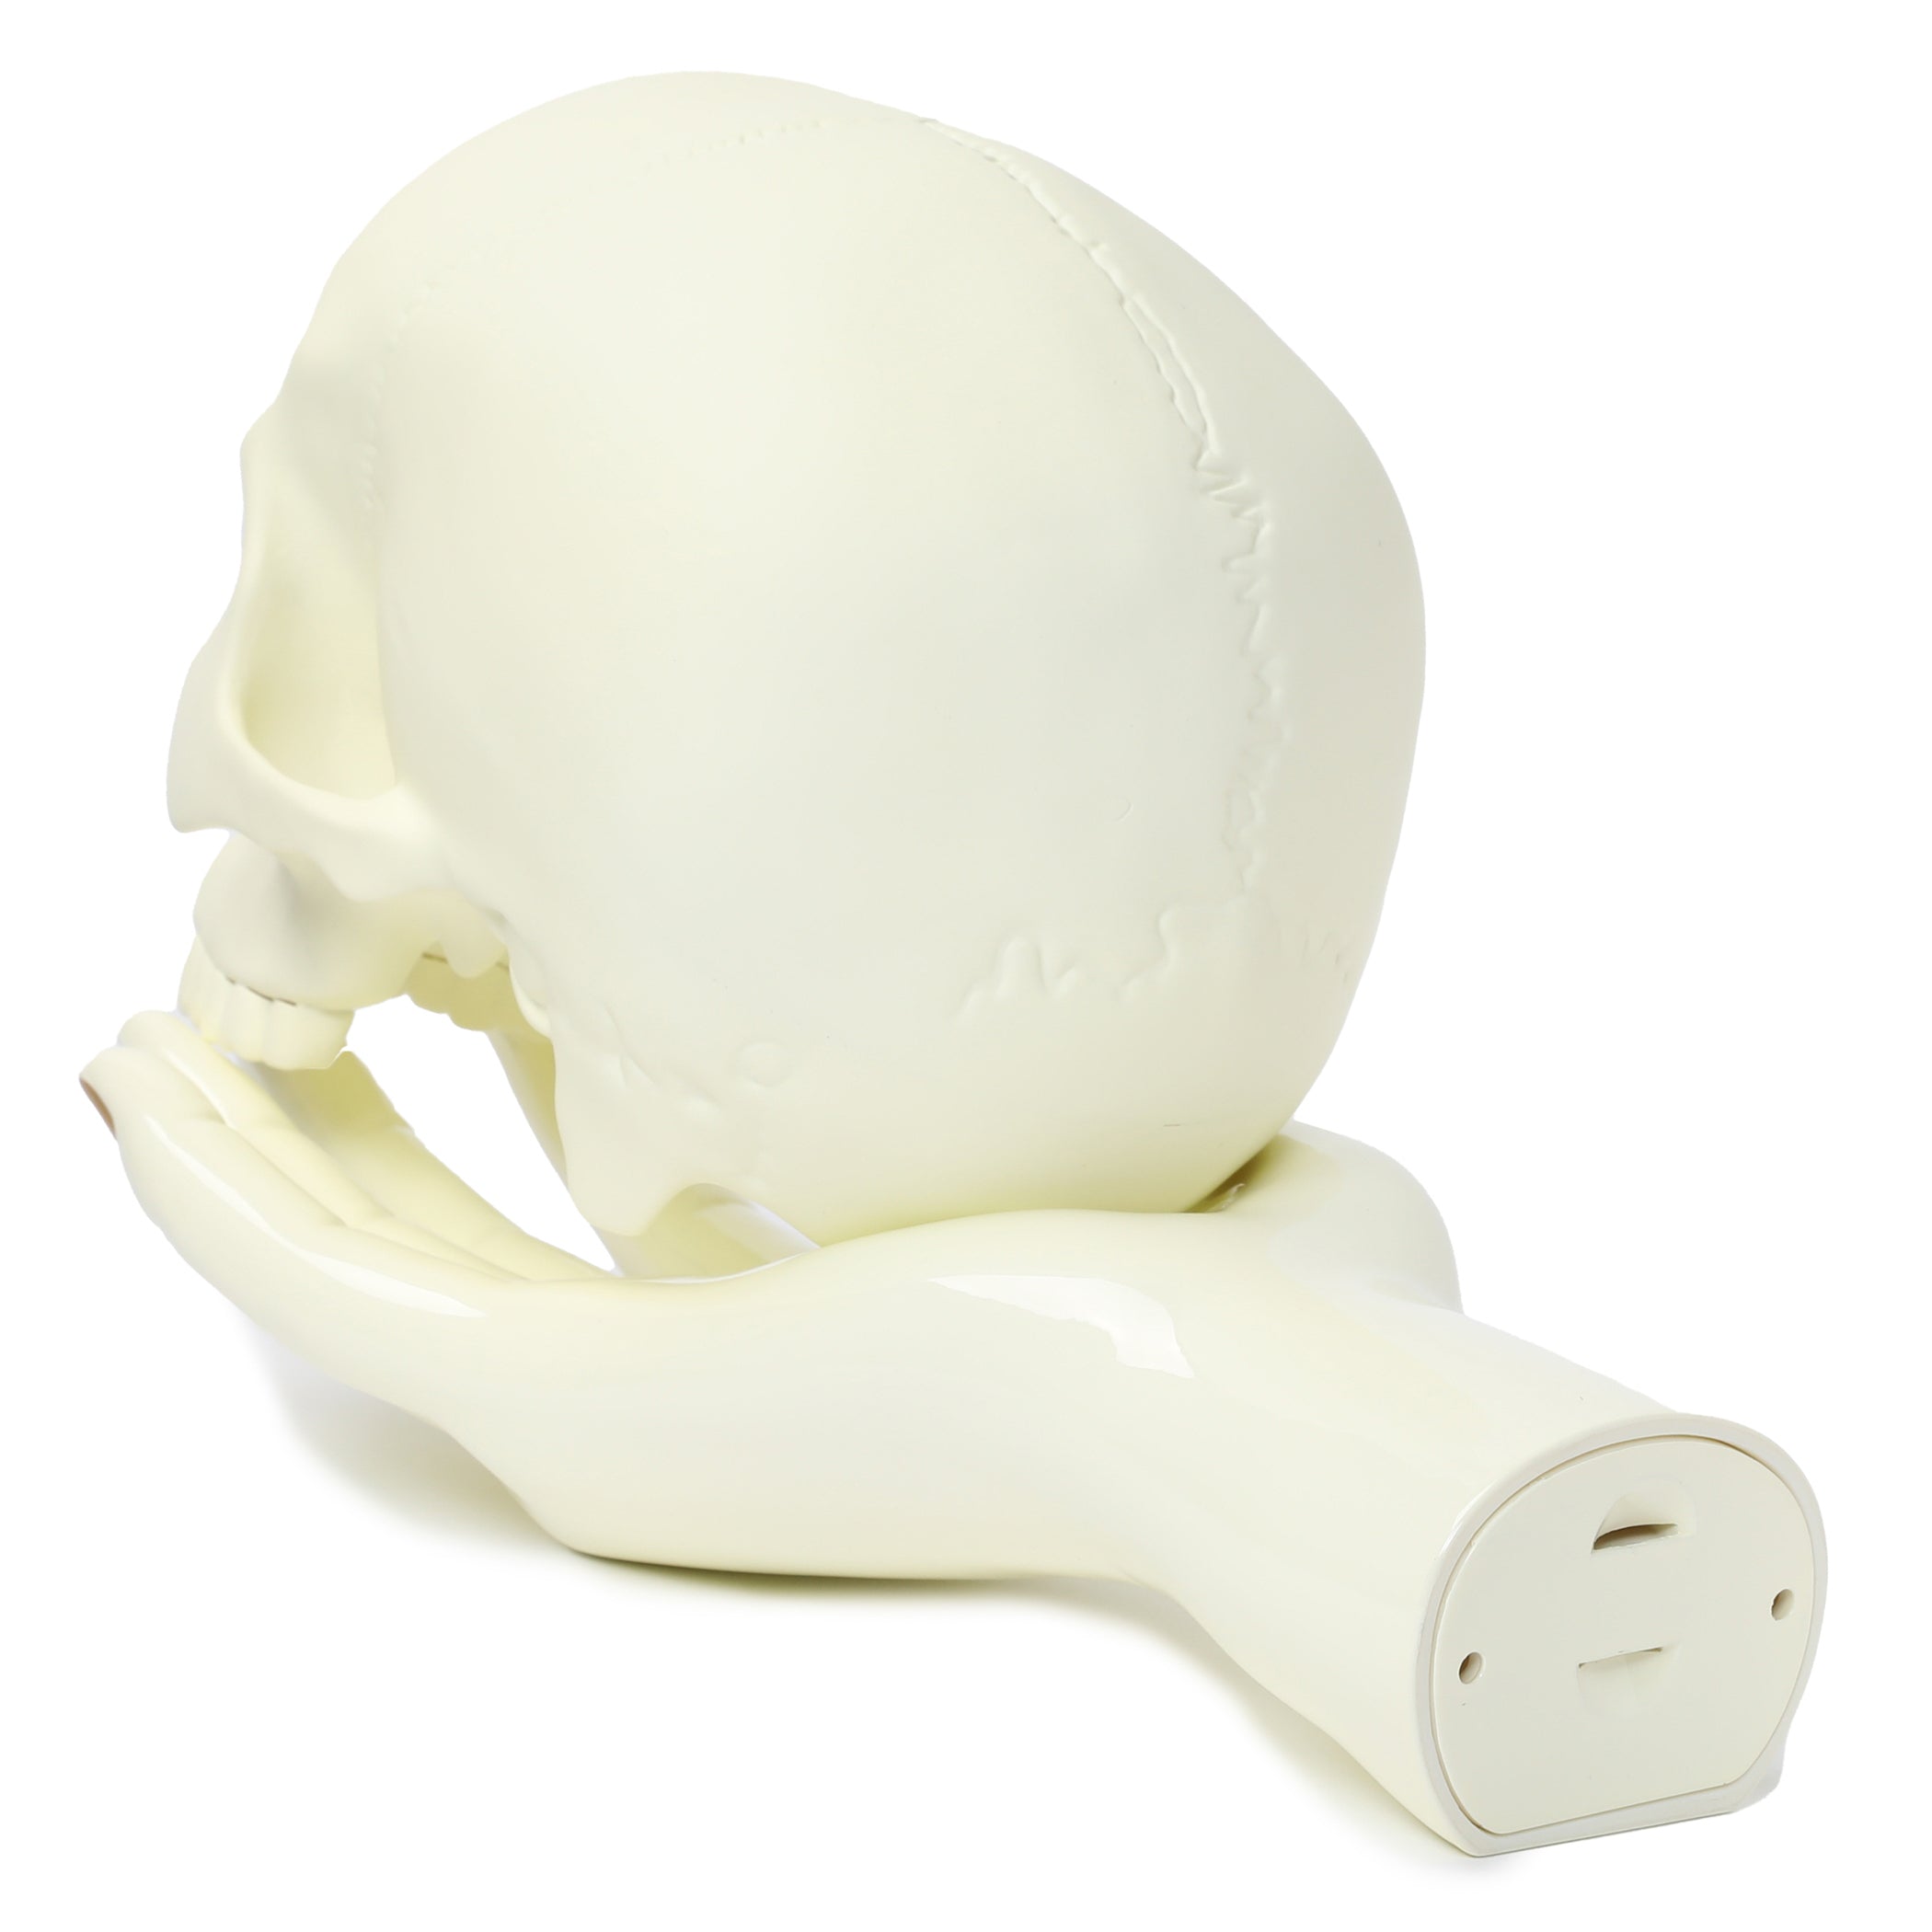 UNDERCOVER: P.A.M X MEDICOM TOY Skull Lamp White (UCZ9Z02-1 A01 